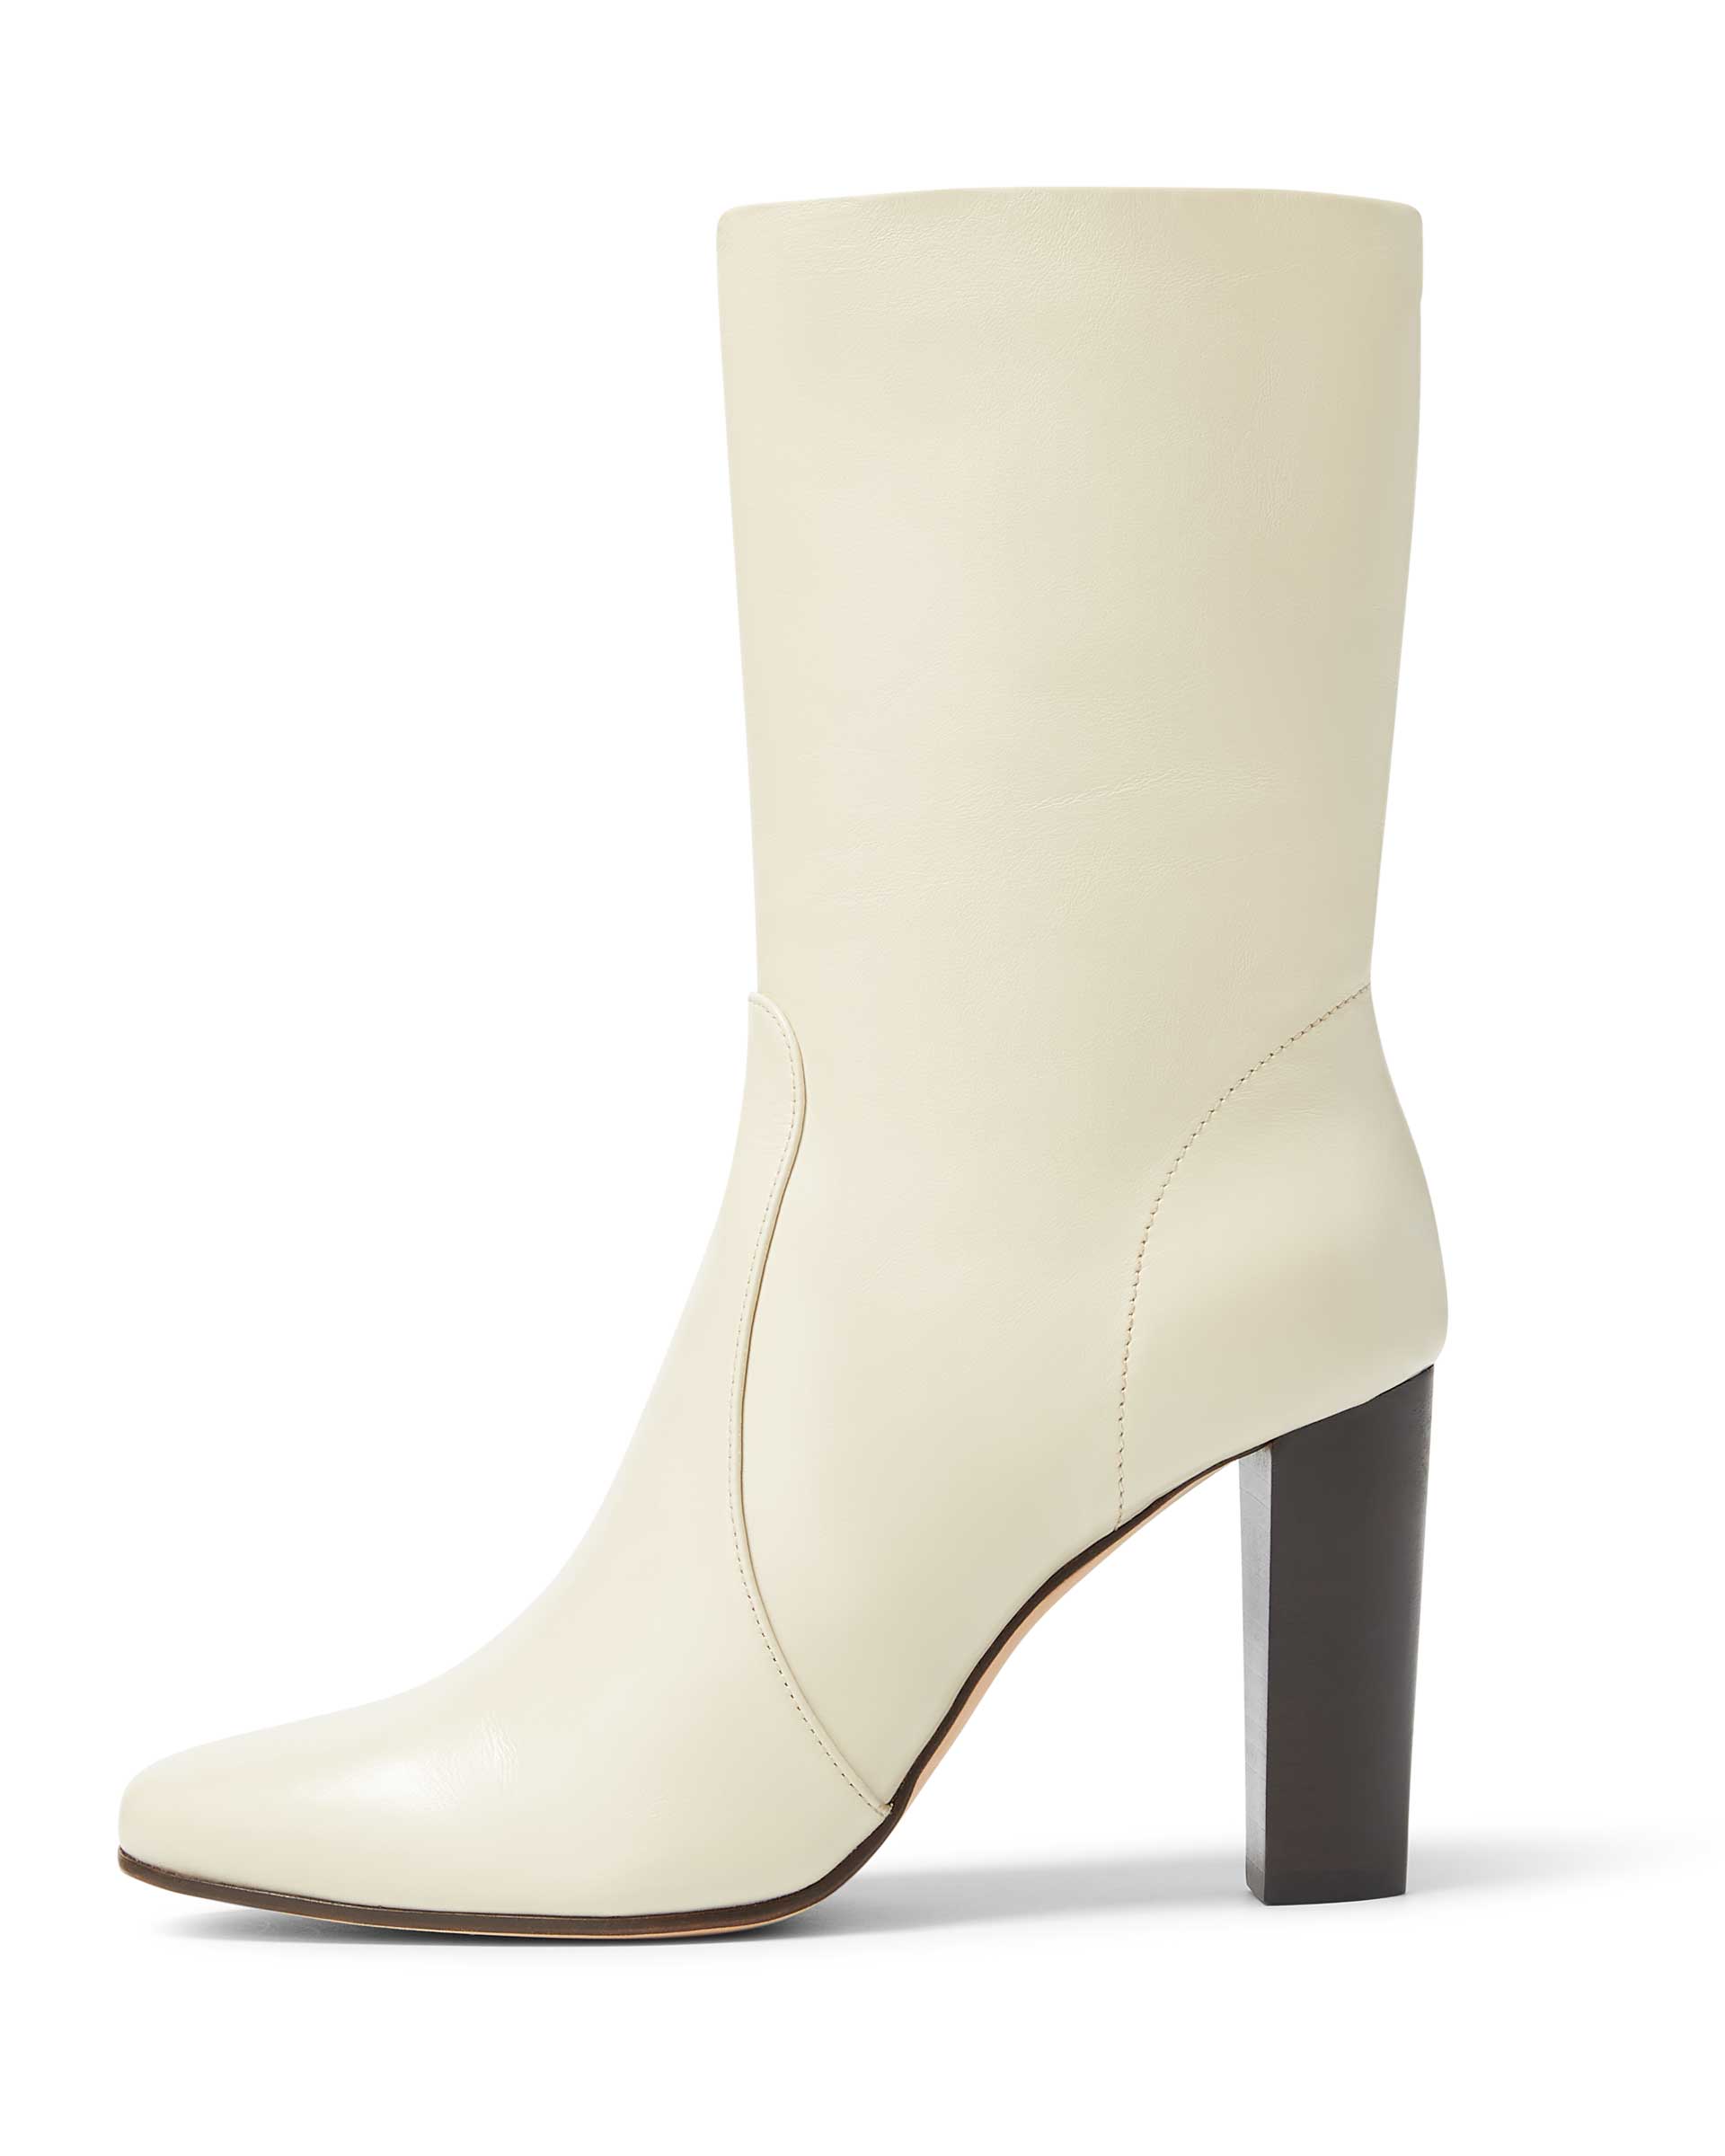 Gaia Heeled Ankle Boots in Leather, Limestone